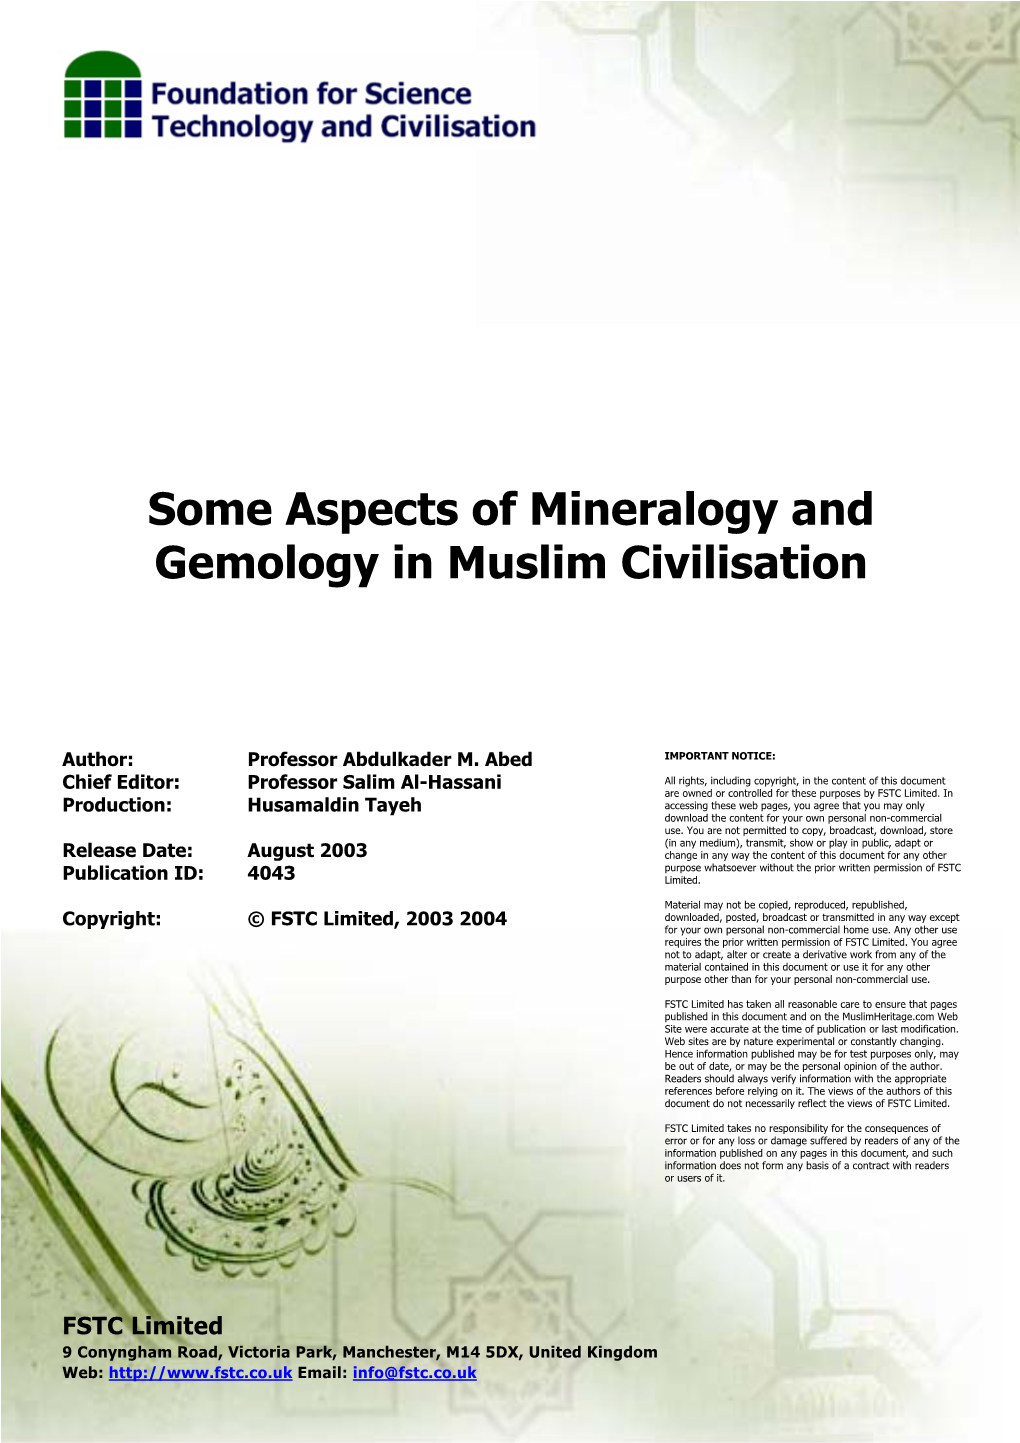 Some Aspects of Mineralogy and Gemology in Muslim Civilisation August 2003